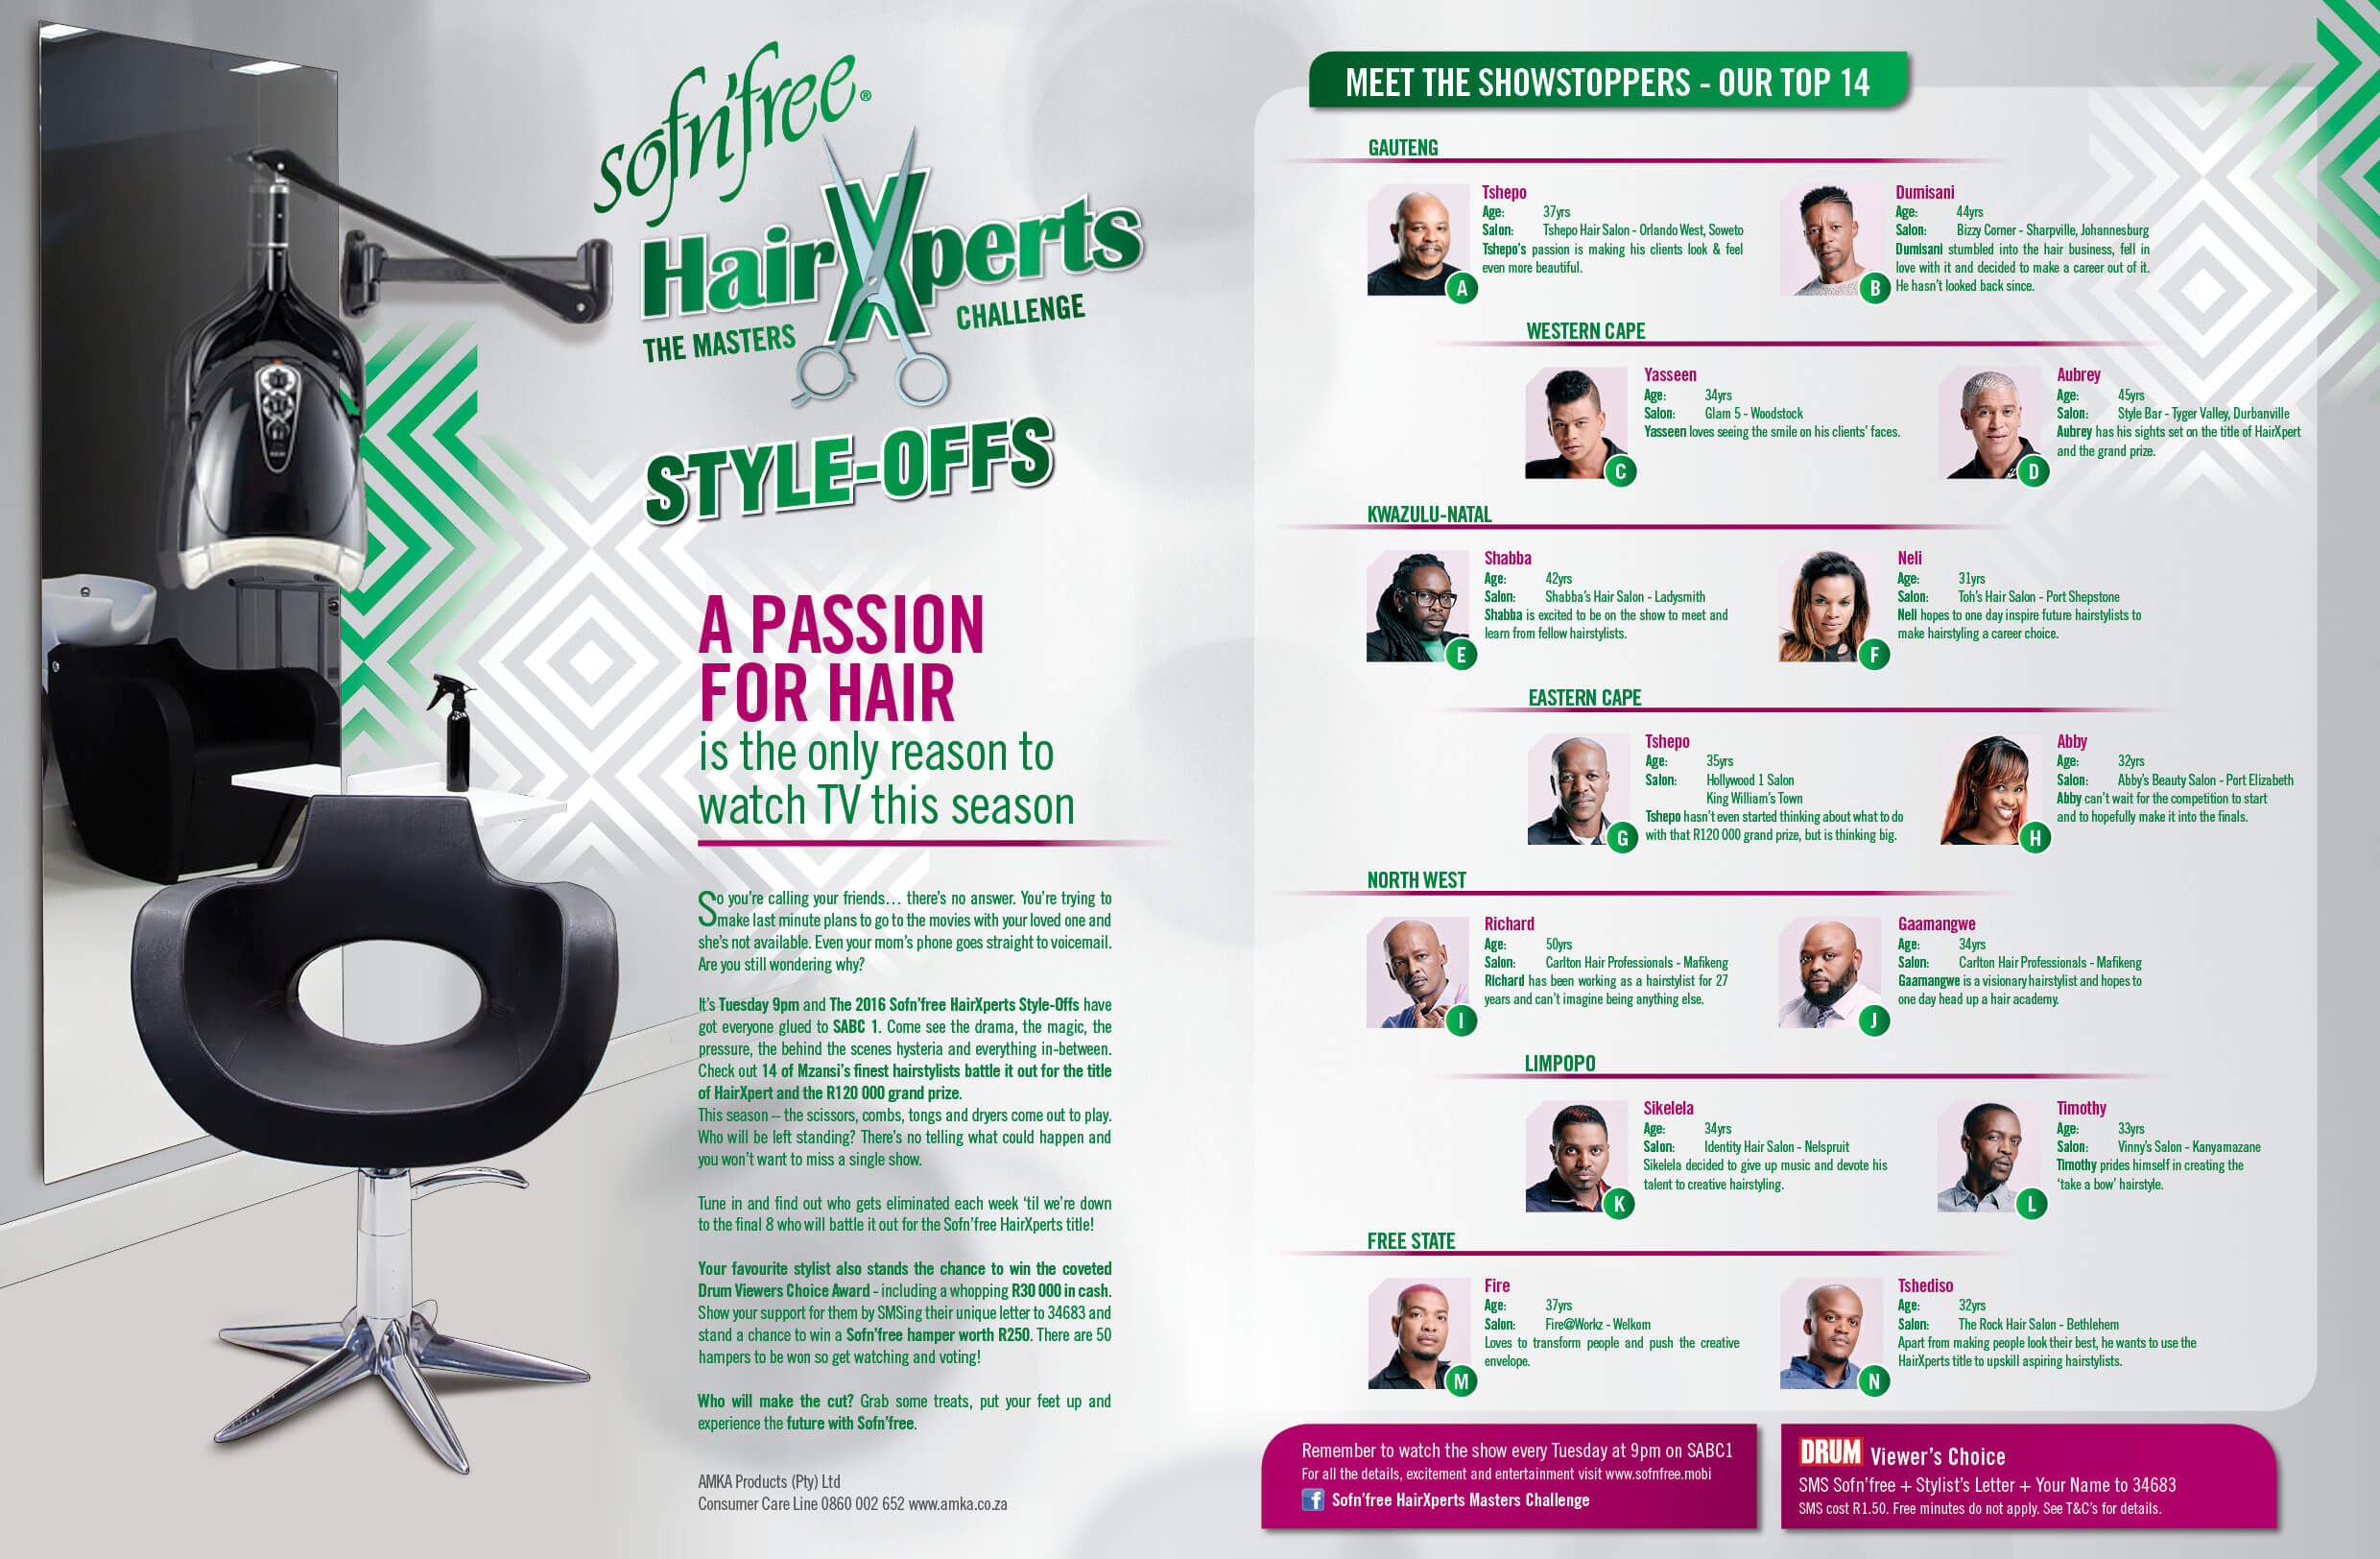 Sofn’free search for the next HairXpert